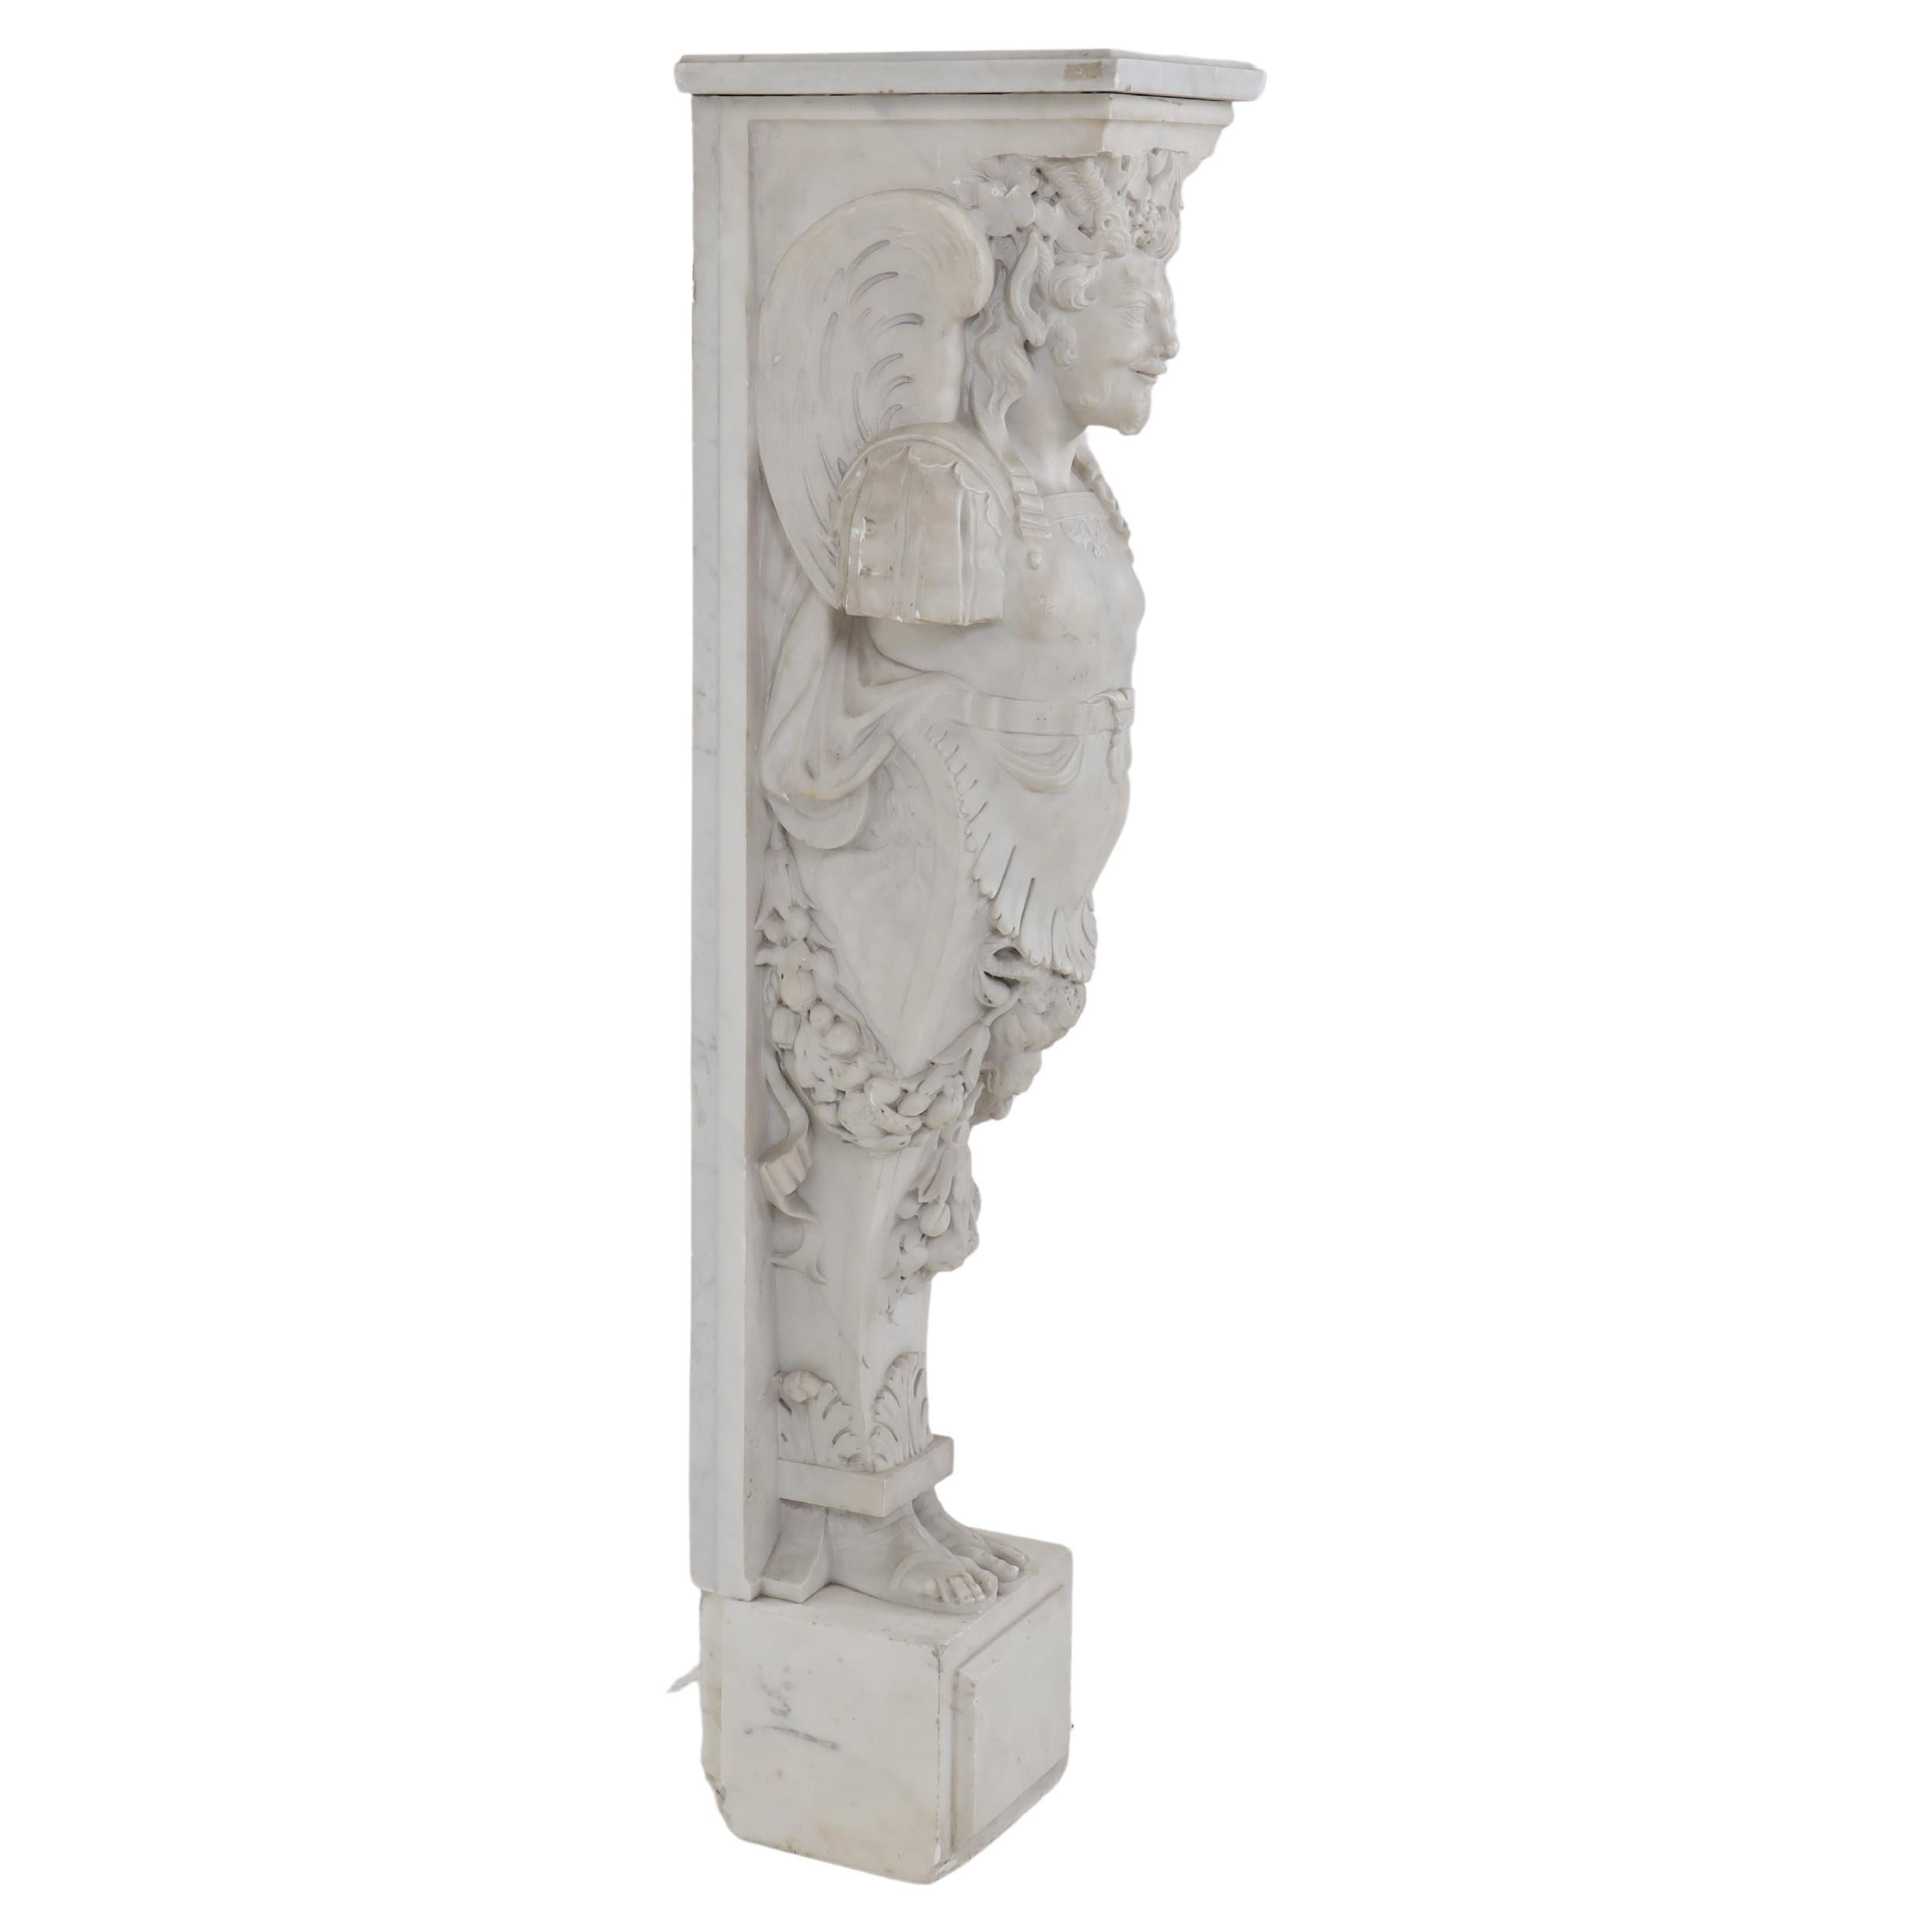 Satyr as a Mantel Piece Pilaster, Italy 19th Century.
Marble mantel piece pilaster in the form of a winged satyr.
 